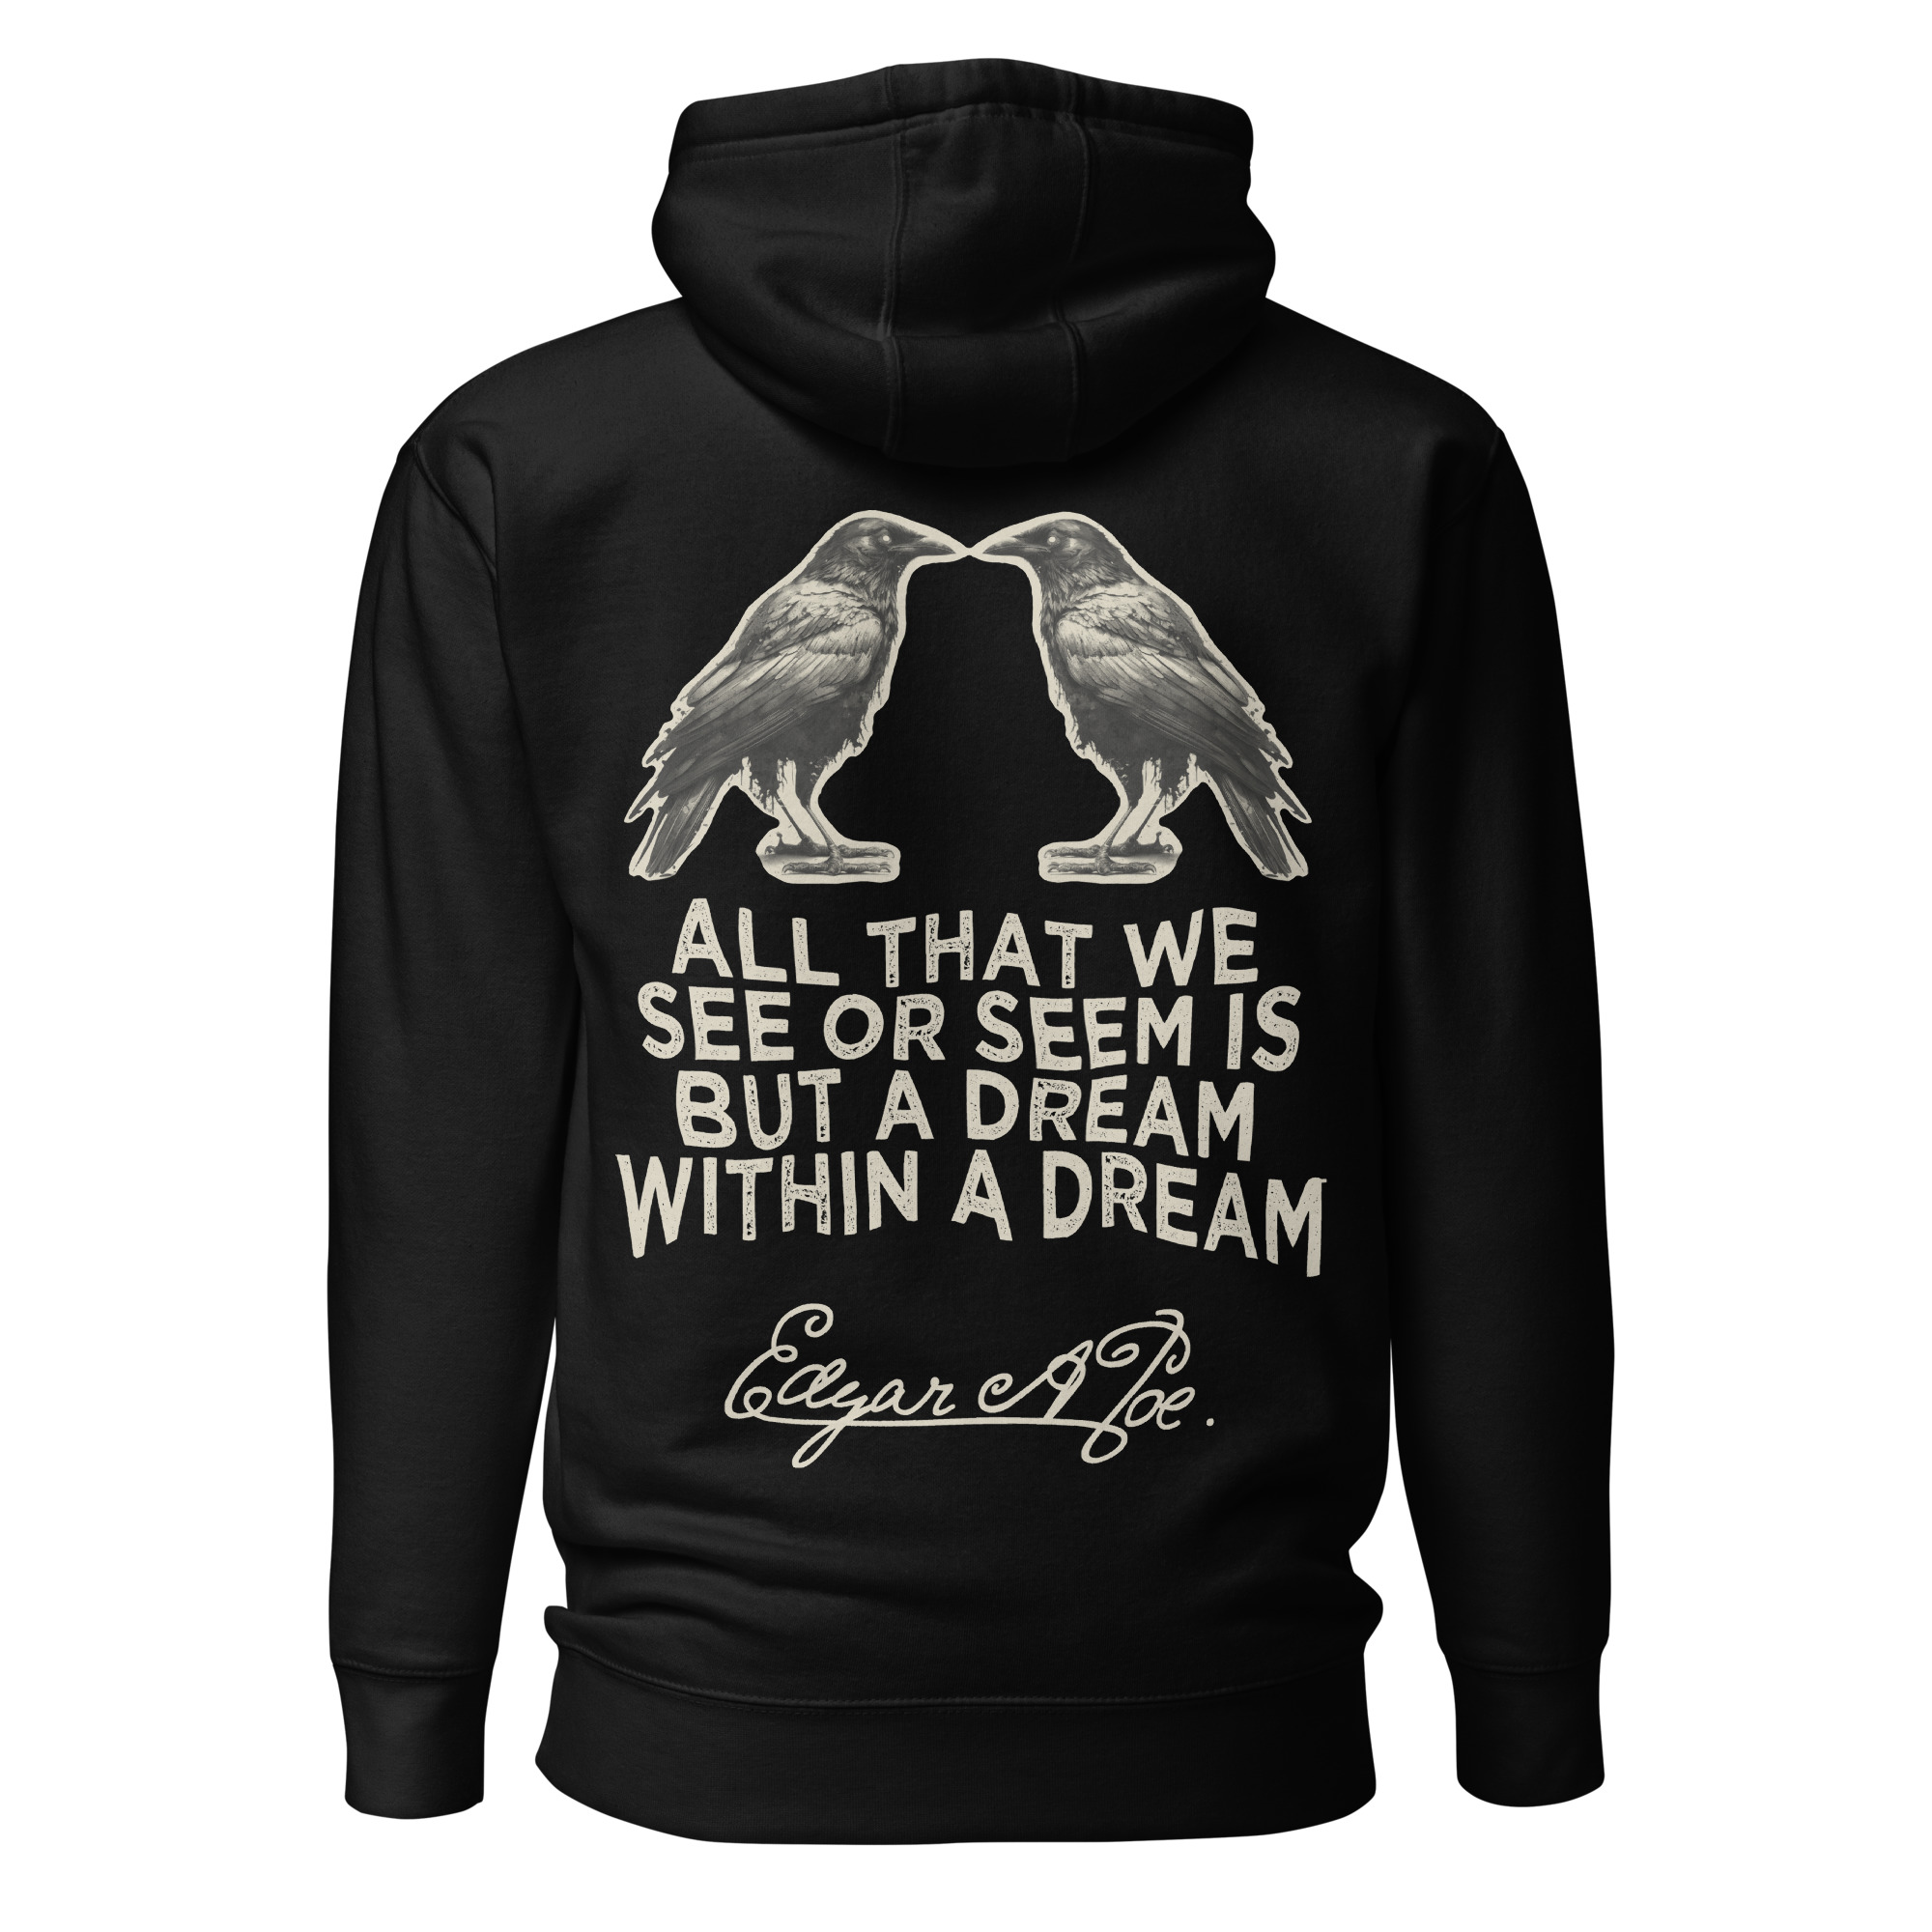 Featured image for “All that we see, E.A.Poe - Unisex Hoodie”